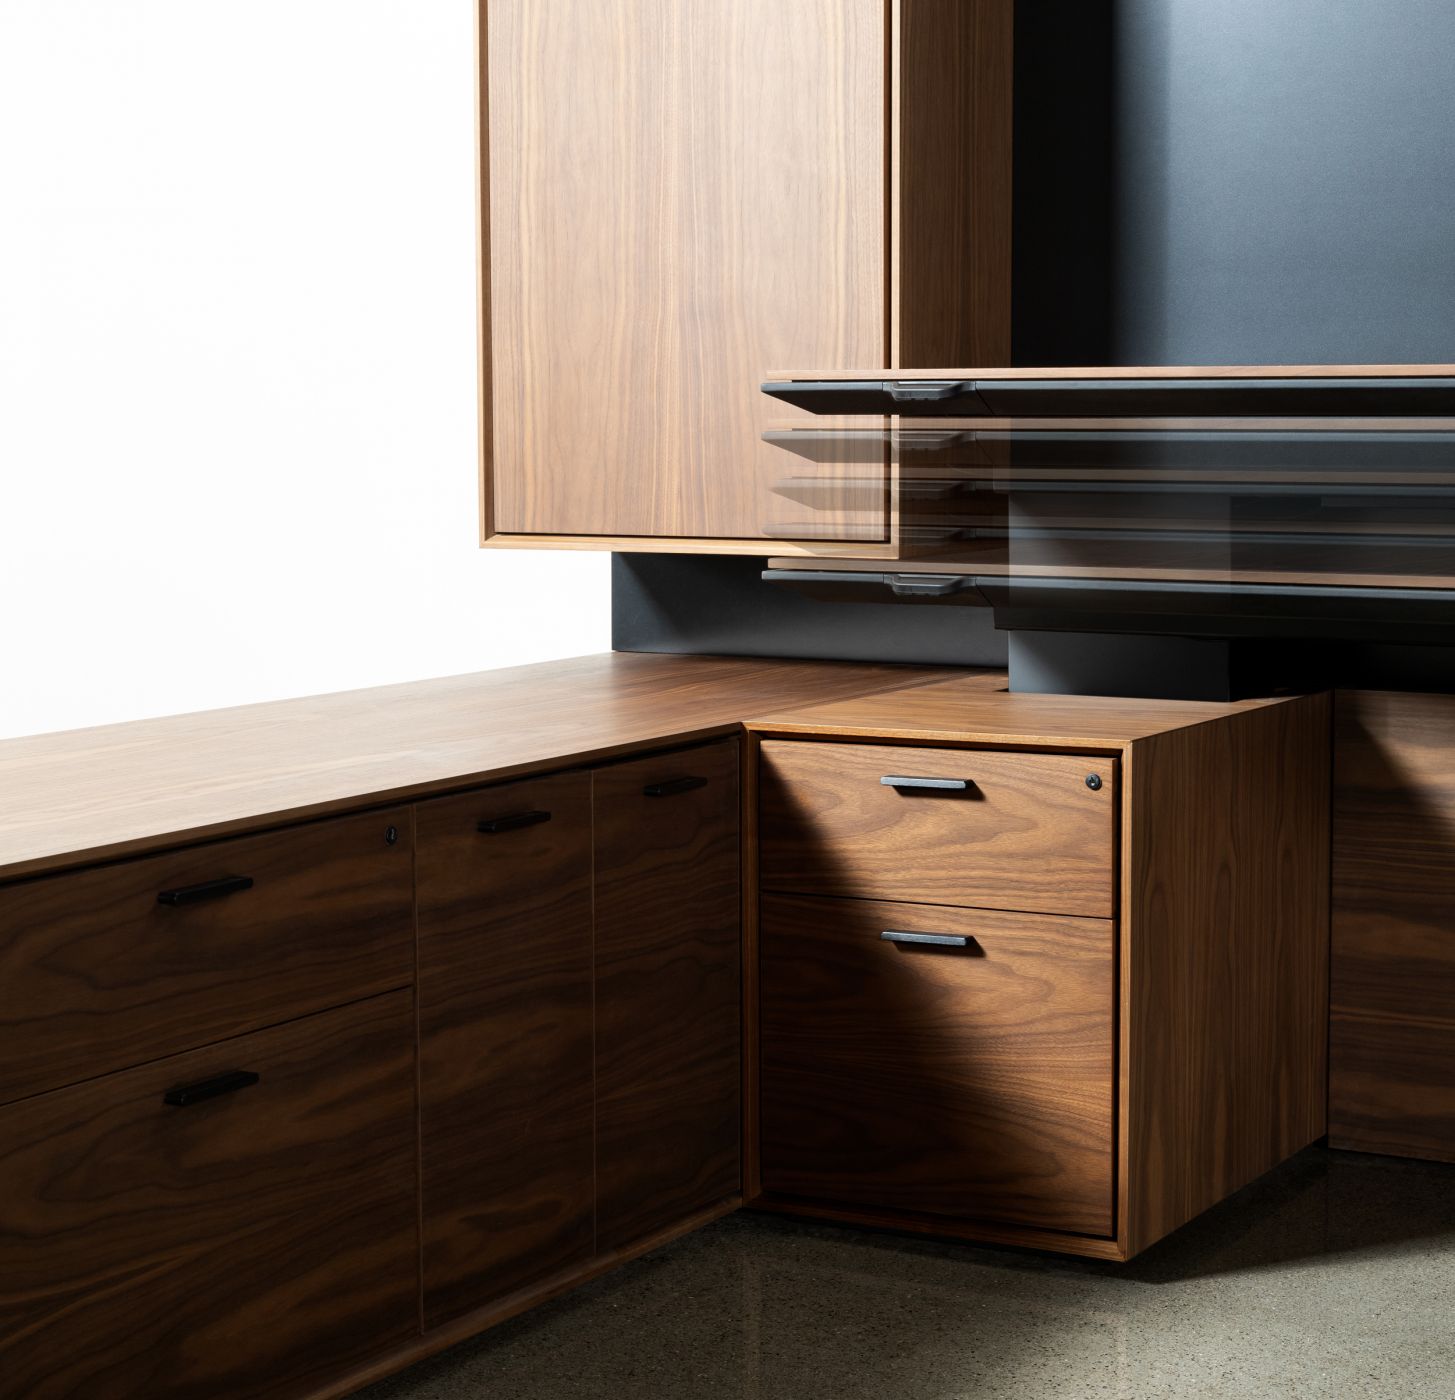 Perfectly sequence matched veneer and impeccably designed ergonomics are hallmarks of Halo office.